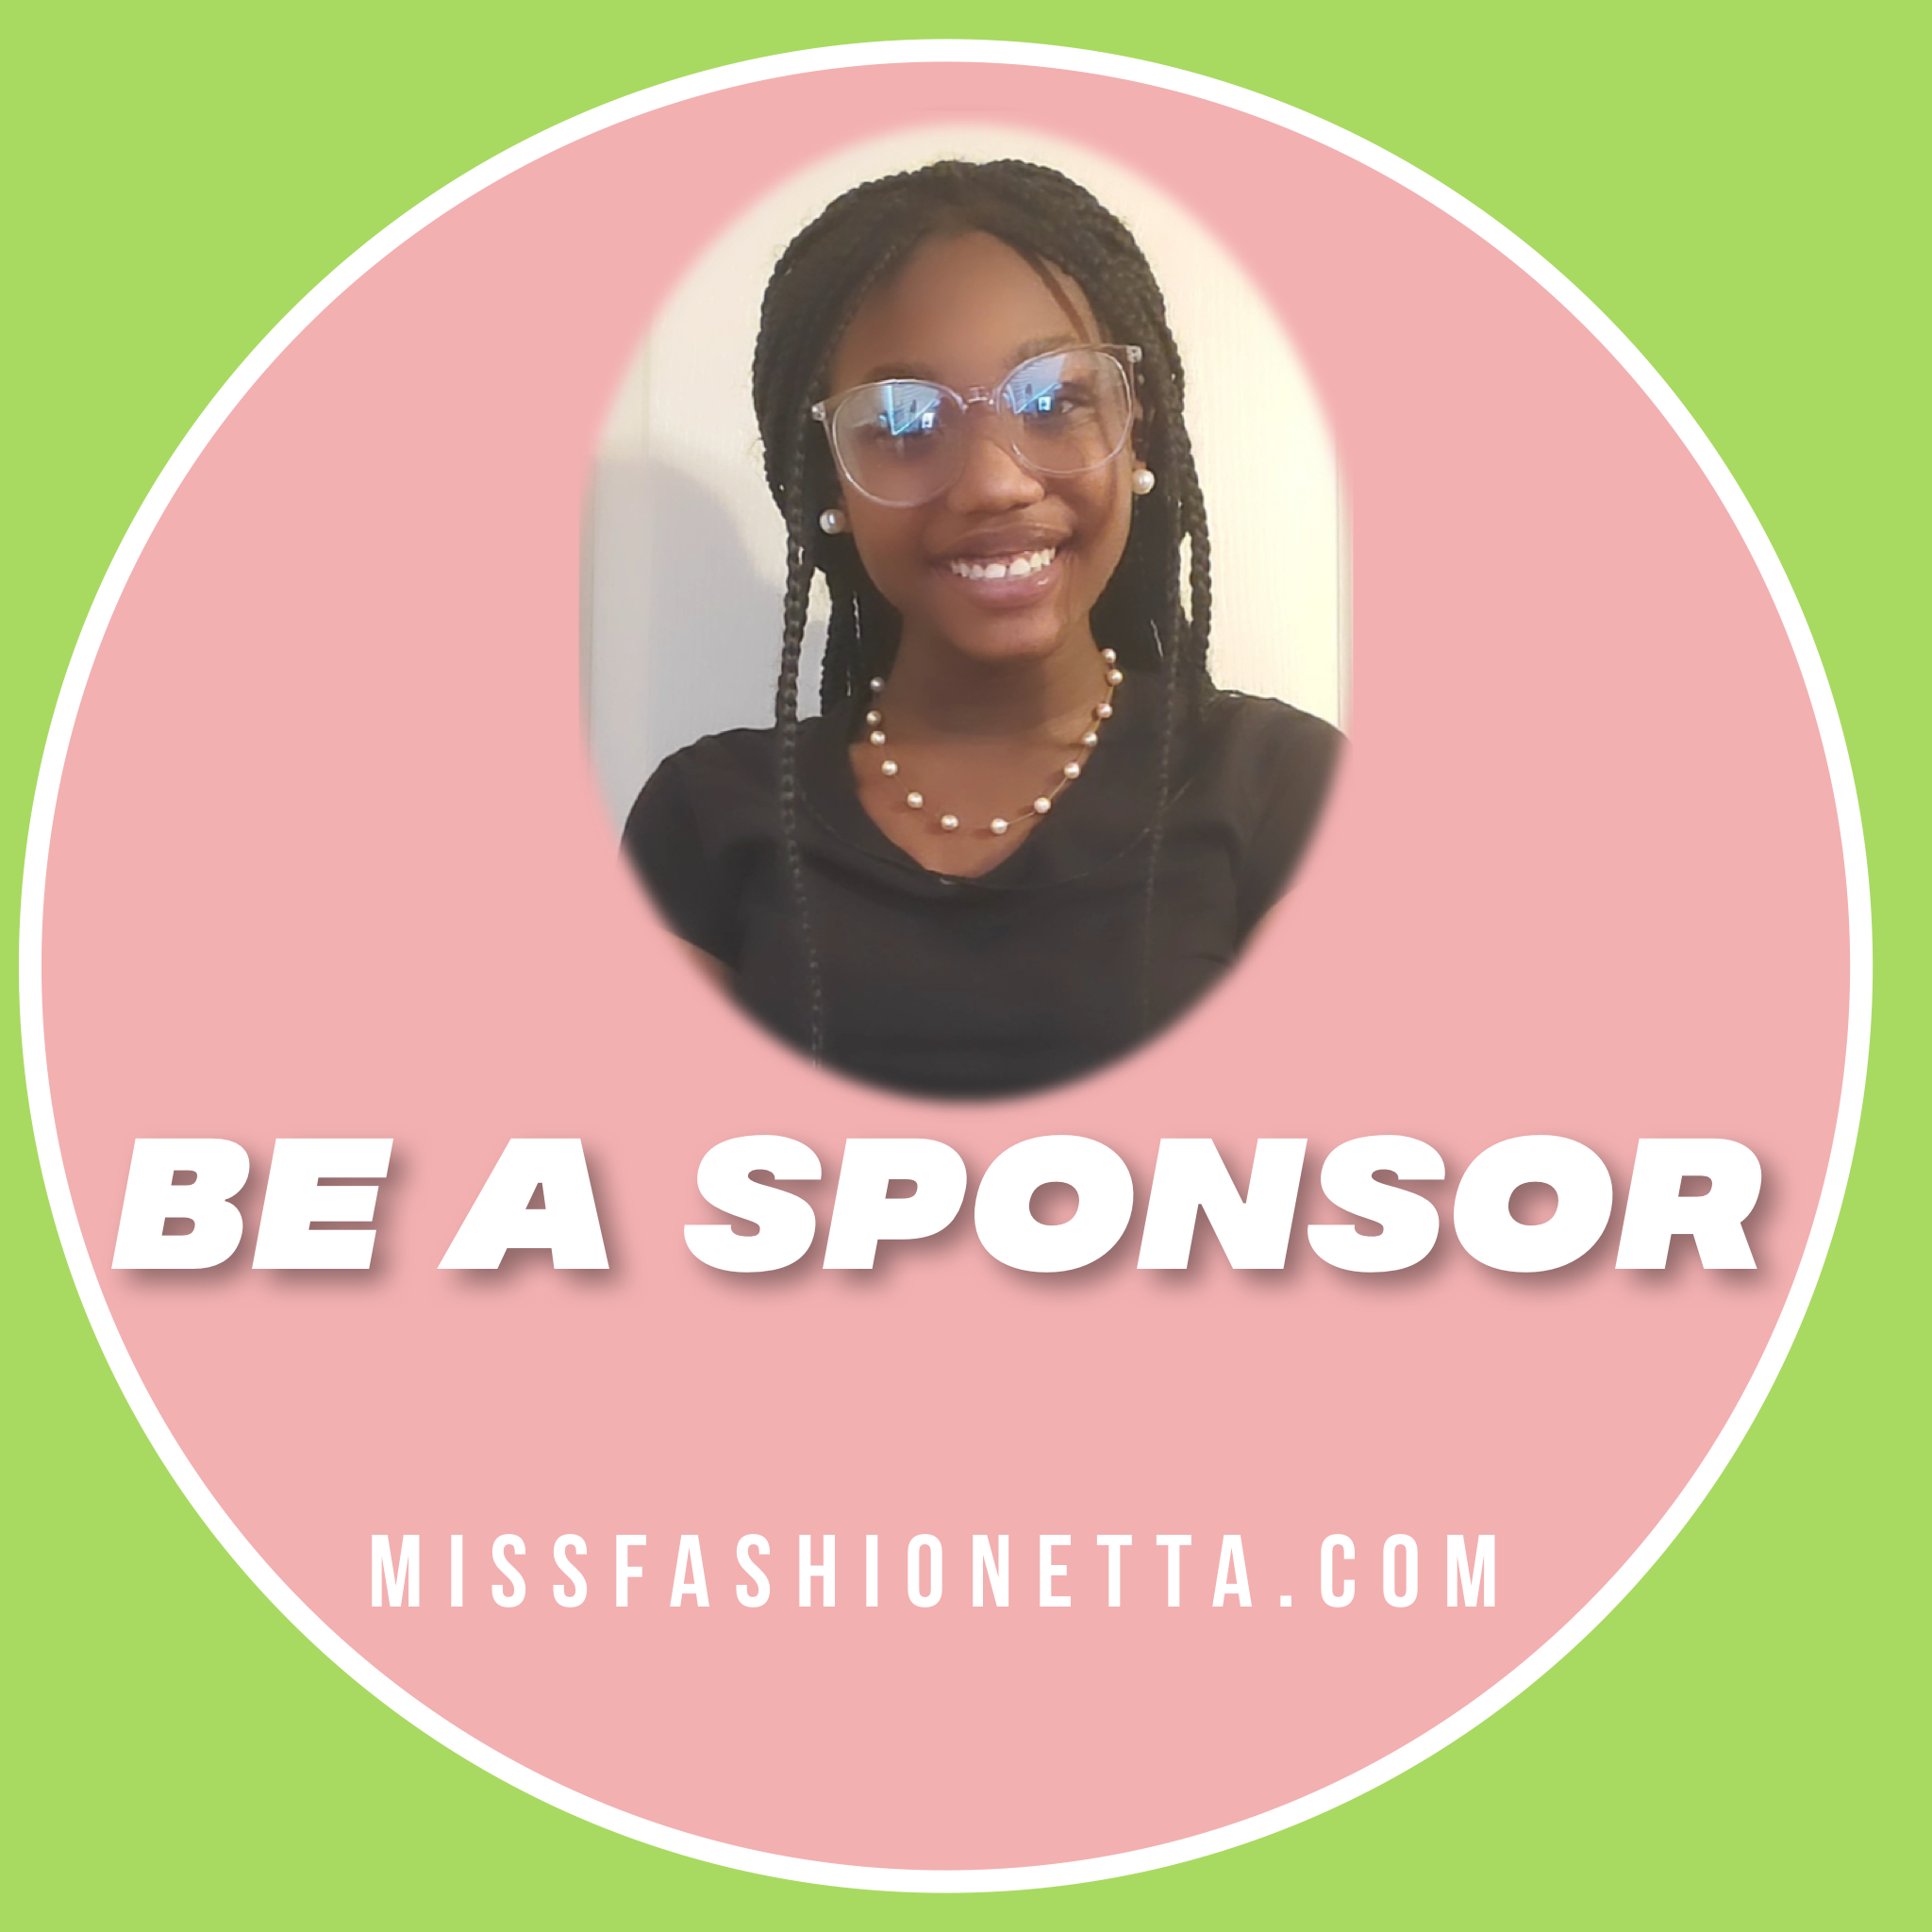    CLICK HERE TO BE A SPONSOR FOR MISS JESSIE-MARIE   